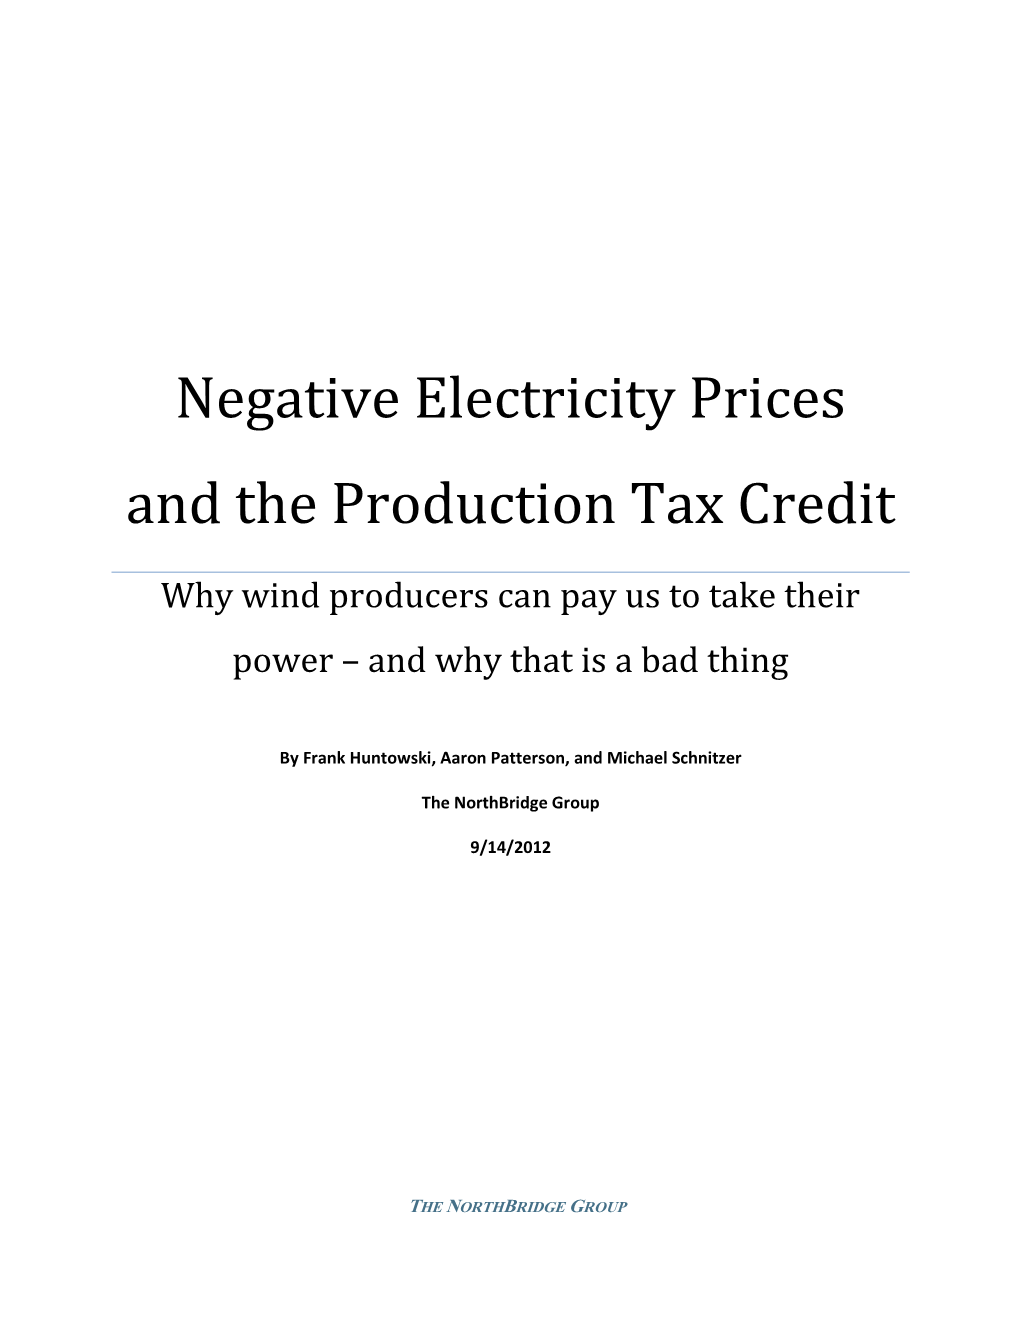 Negative Electricity Prices and the Production Tax Credit